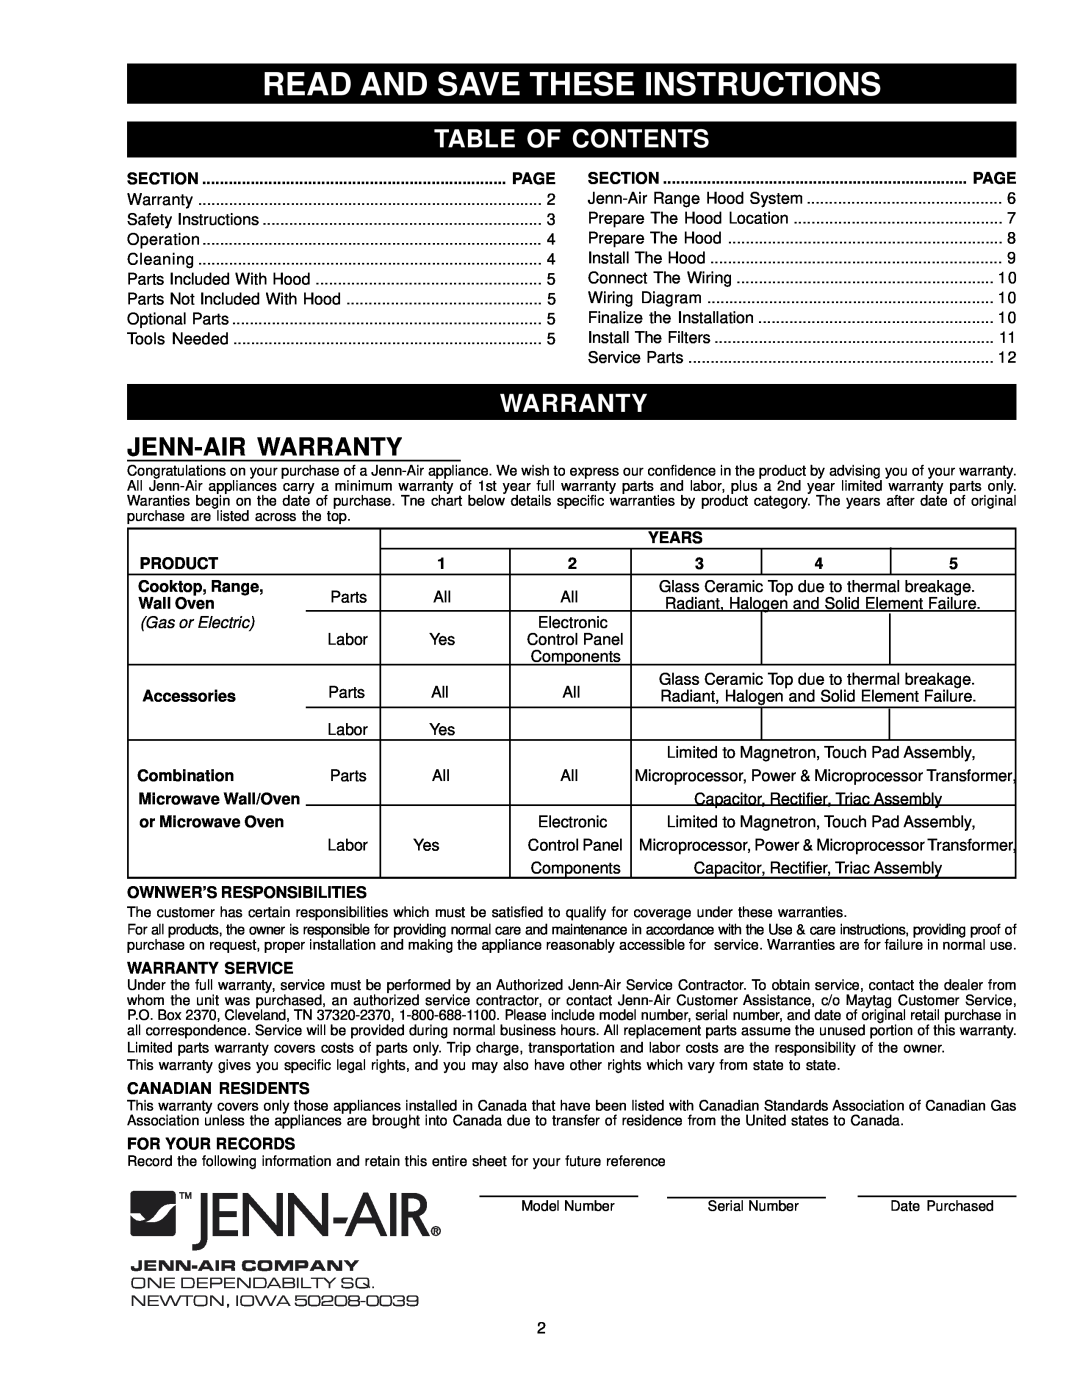 Jenn-Air JXT9048BDP Read And Save These Instructions, Table Of Contents, Jenn-Air Warranty, Section, Page, Years 